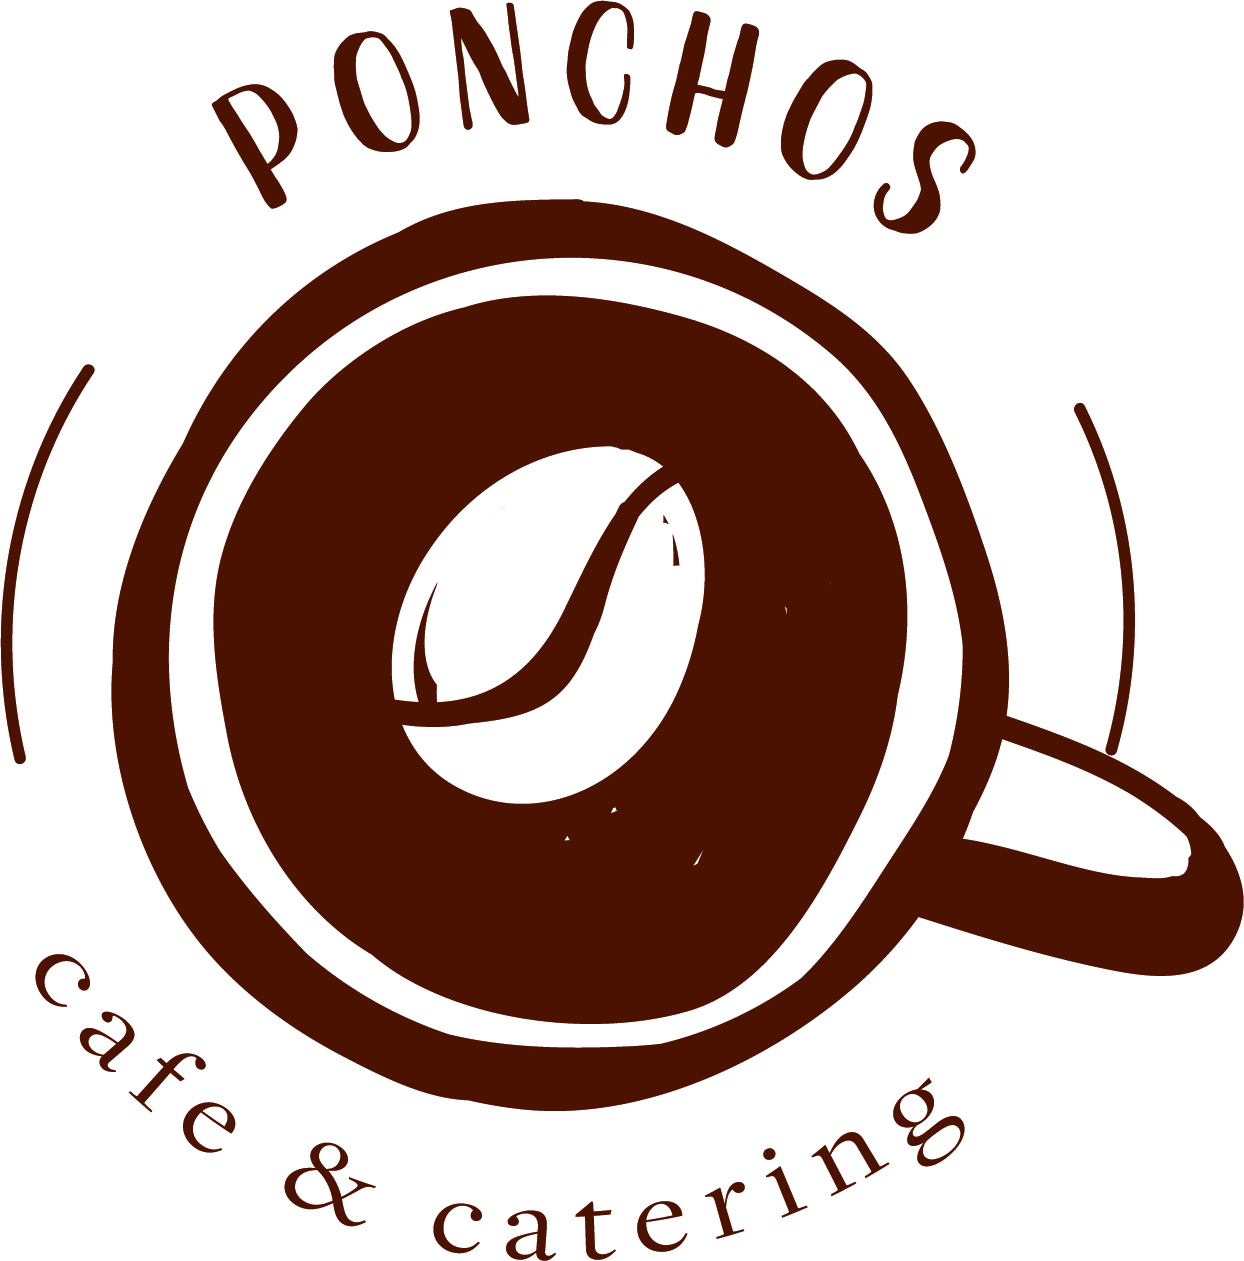 Poncho's Cafe & Catering